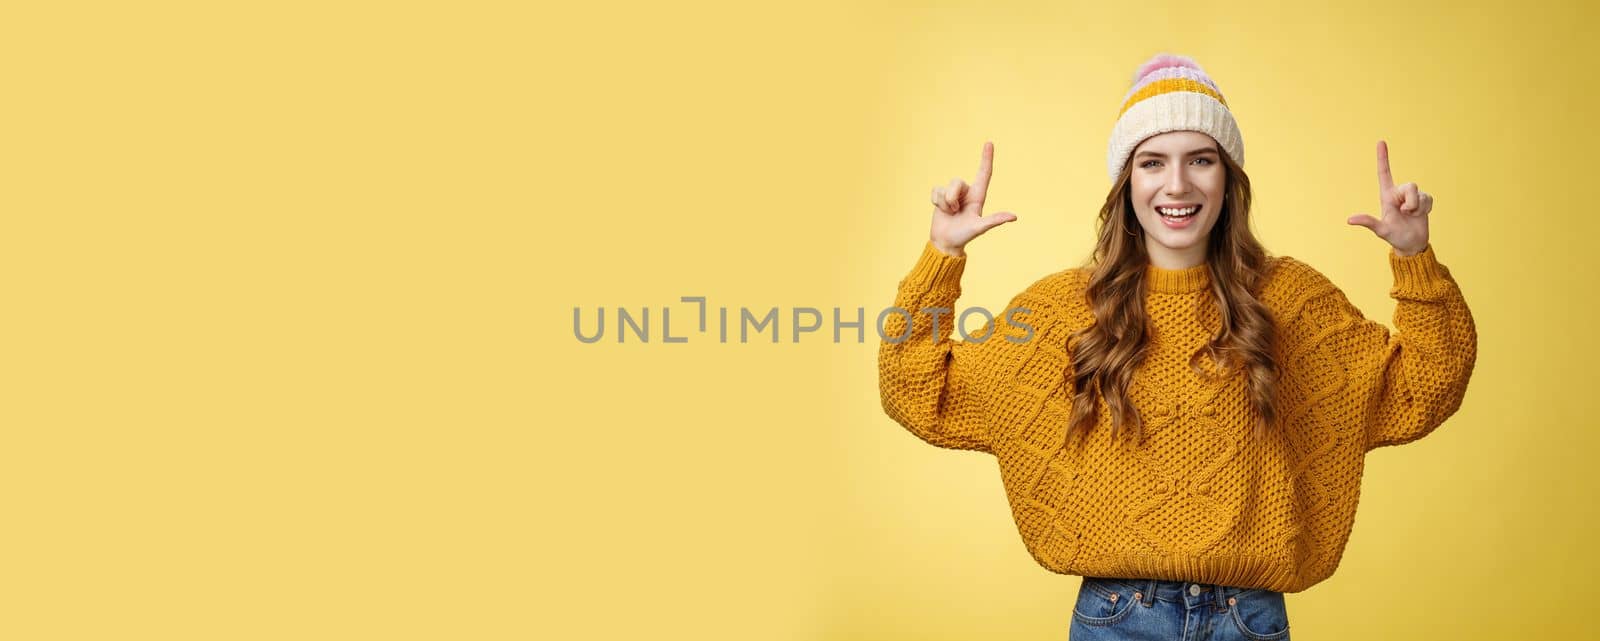 Friendly charming energized young 20s woman dress-up stylish hat sweater having fun introducing promotion pointing raised index finger up showing top advertisement, smiling happily yellow background.